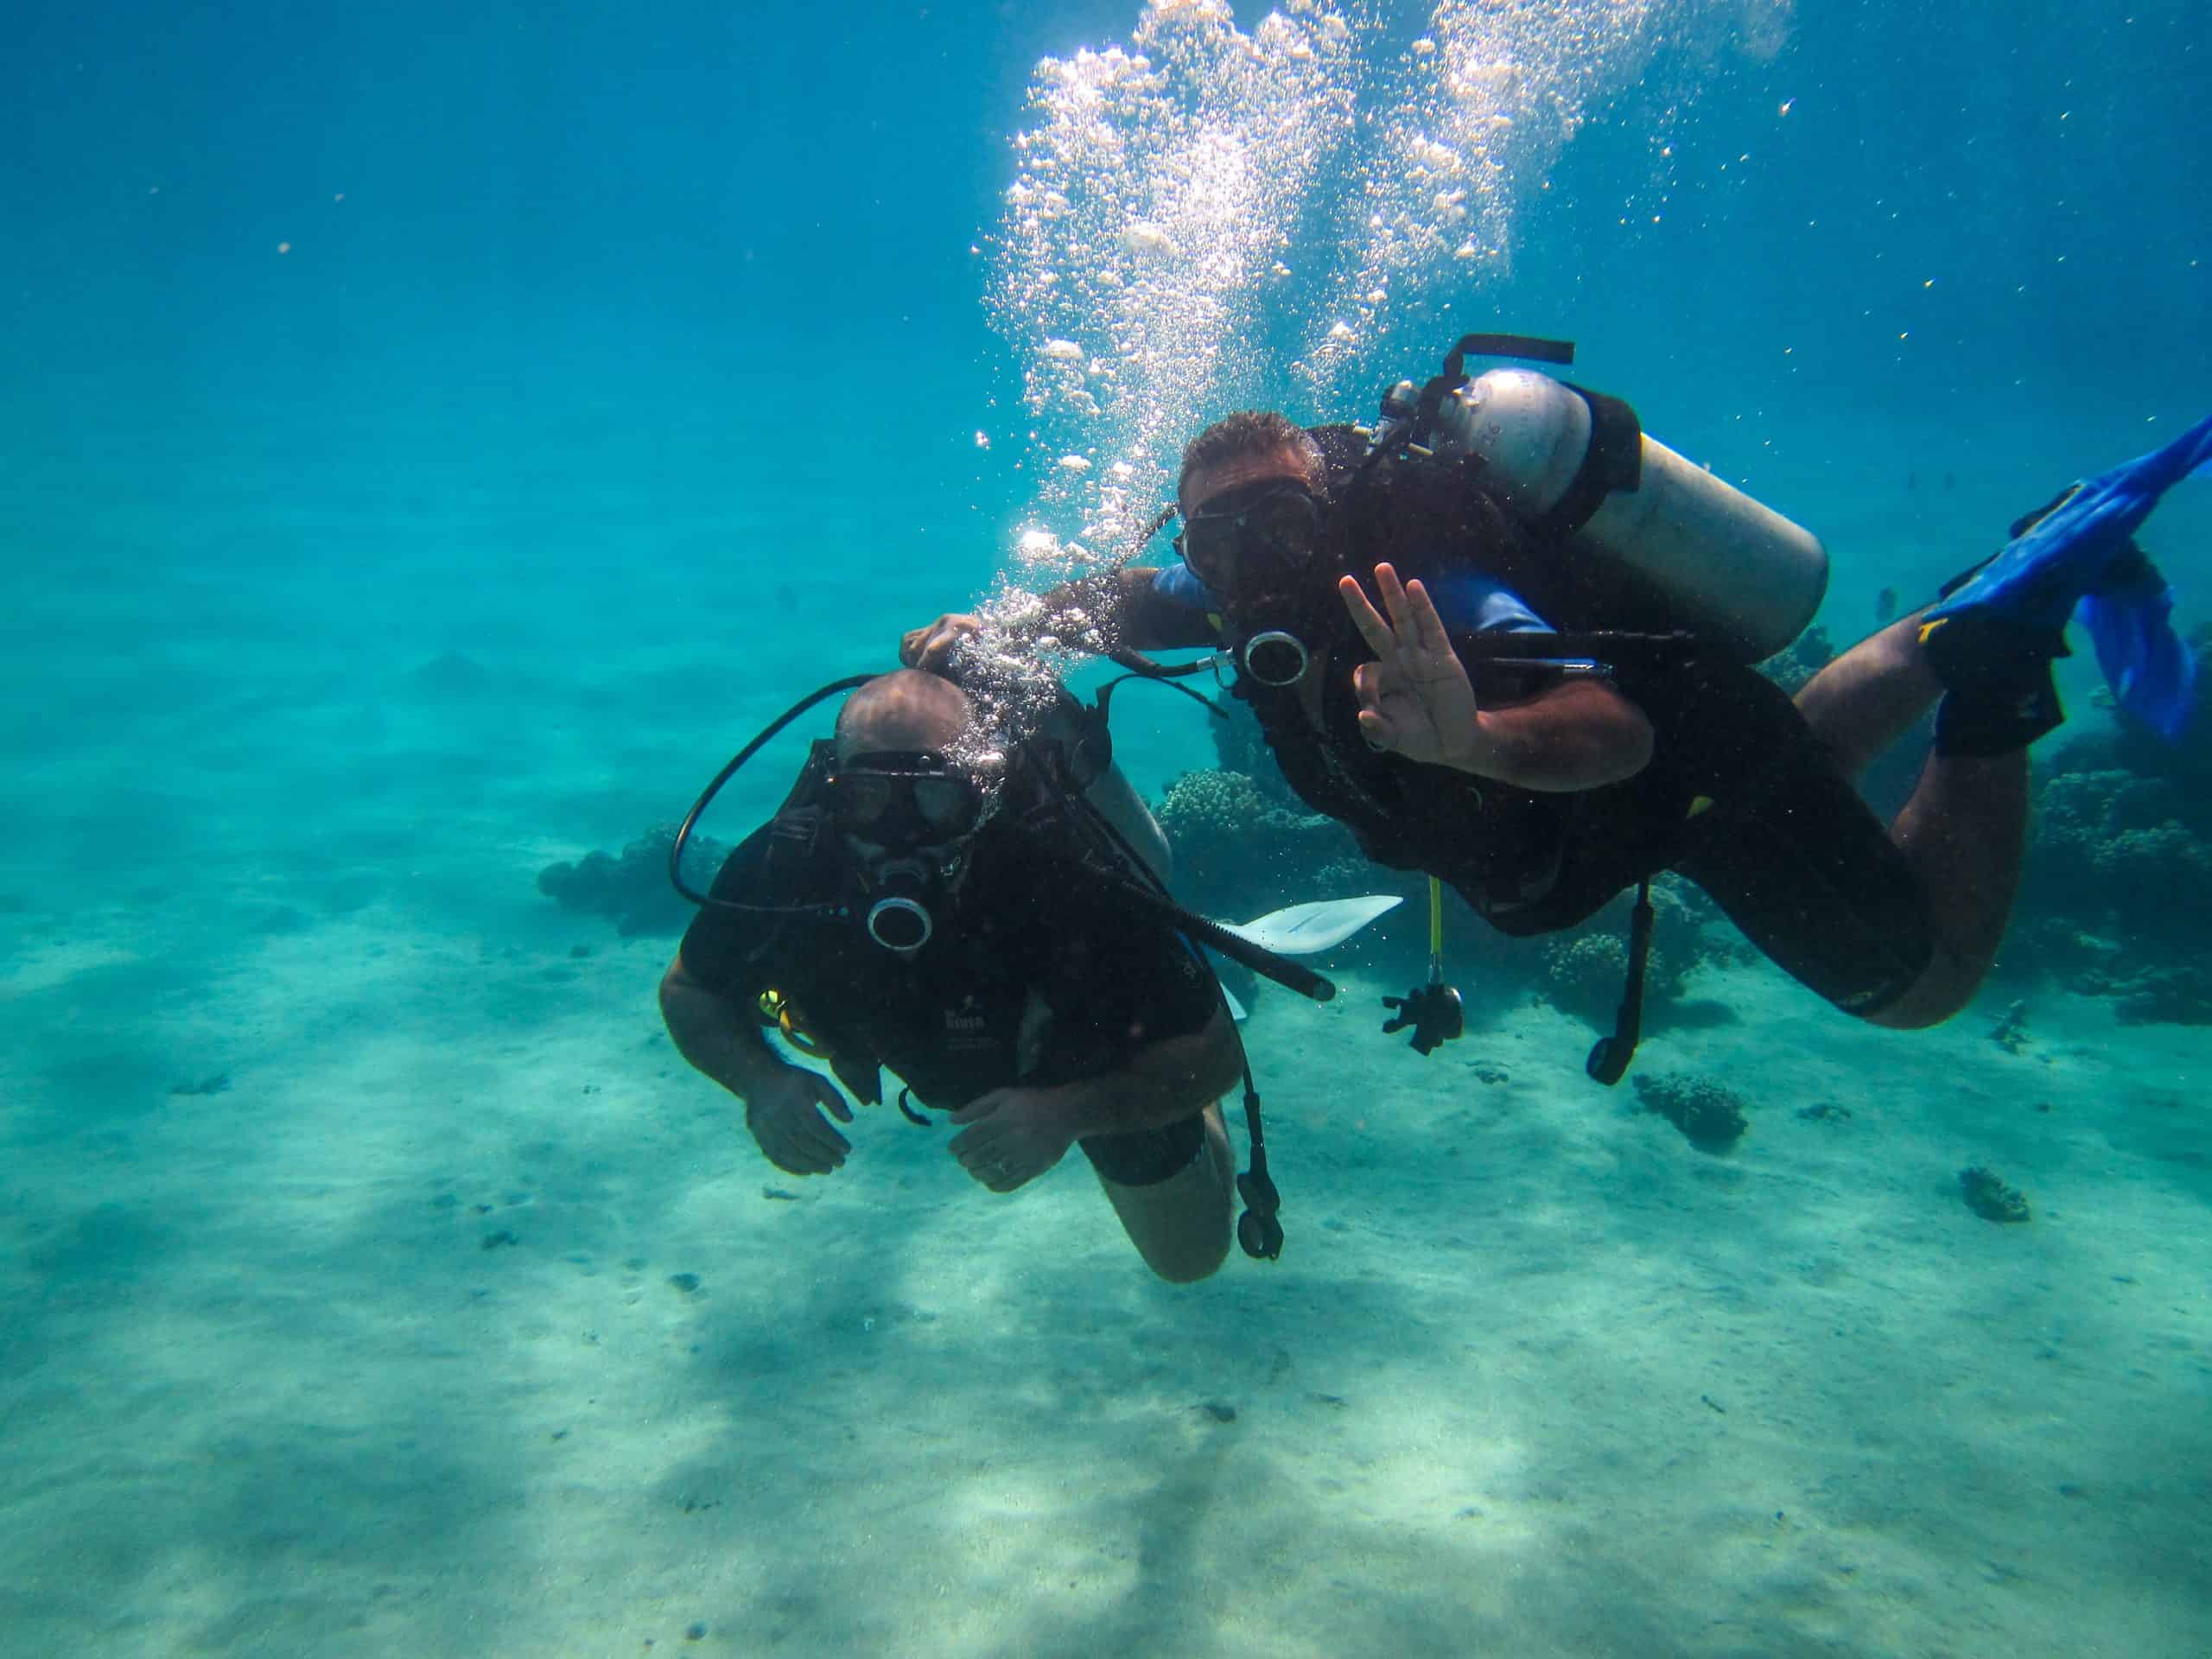 What should I consider when buying diving equipment?